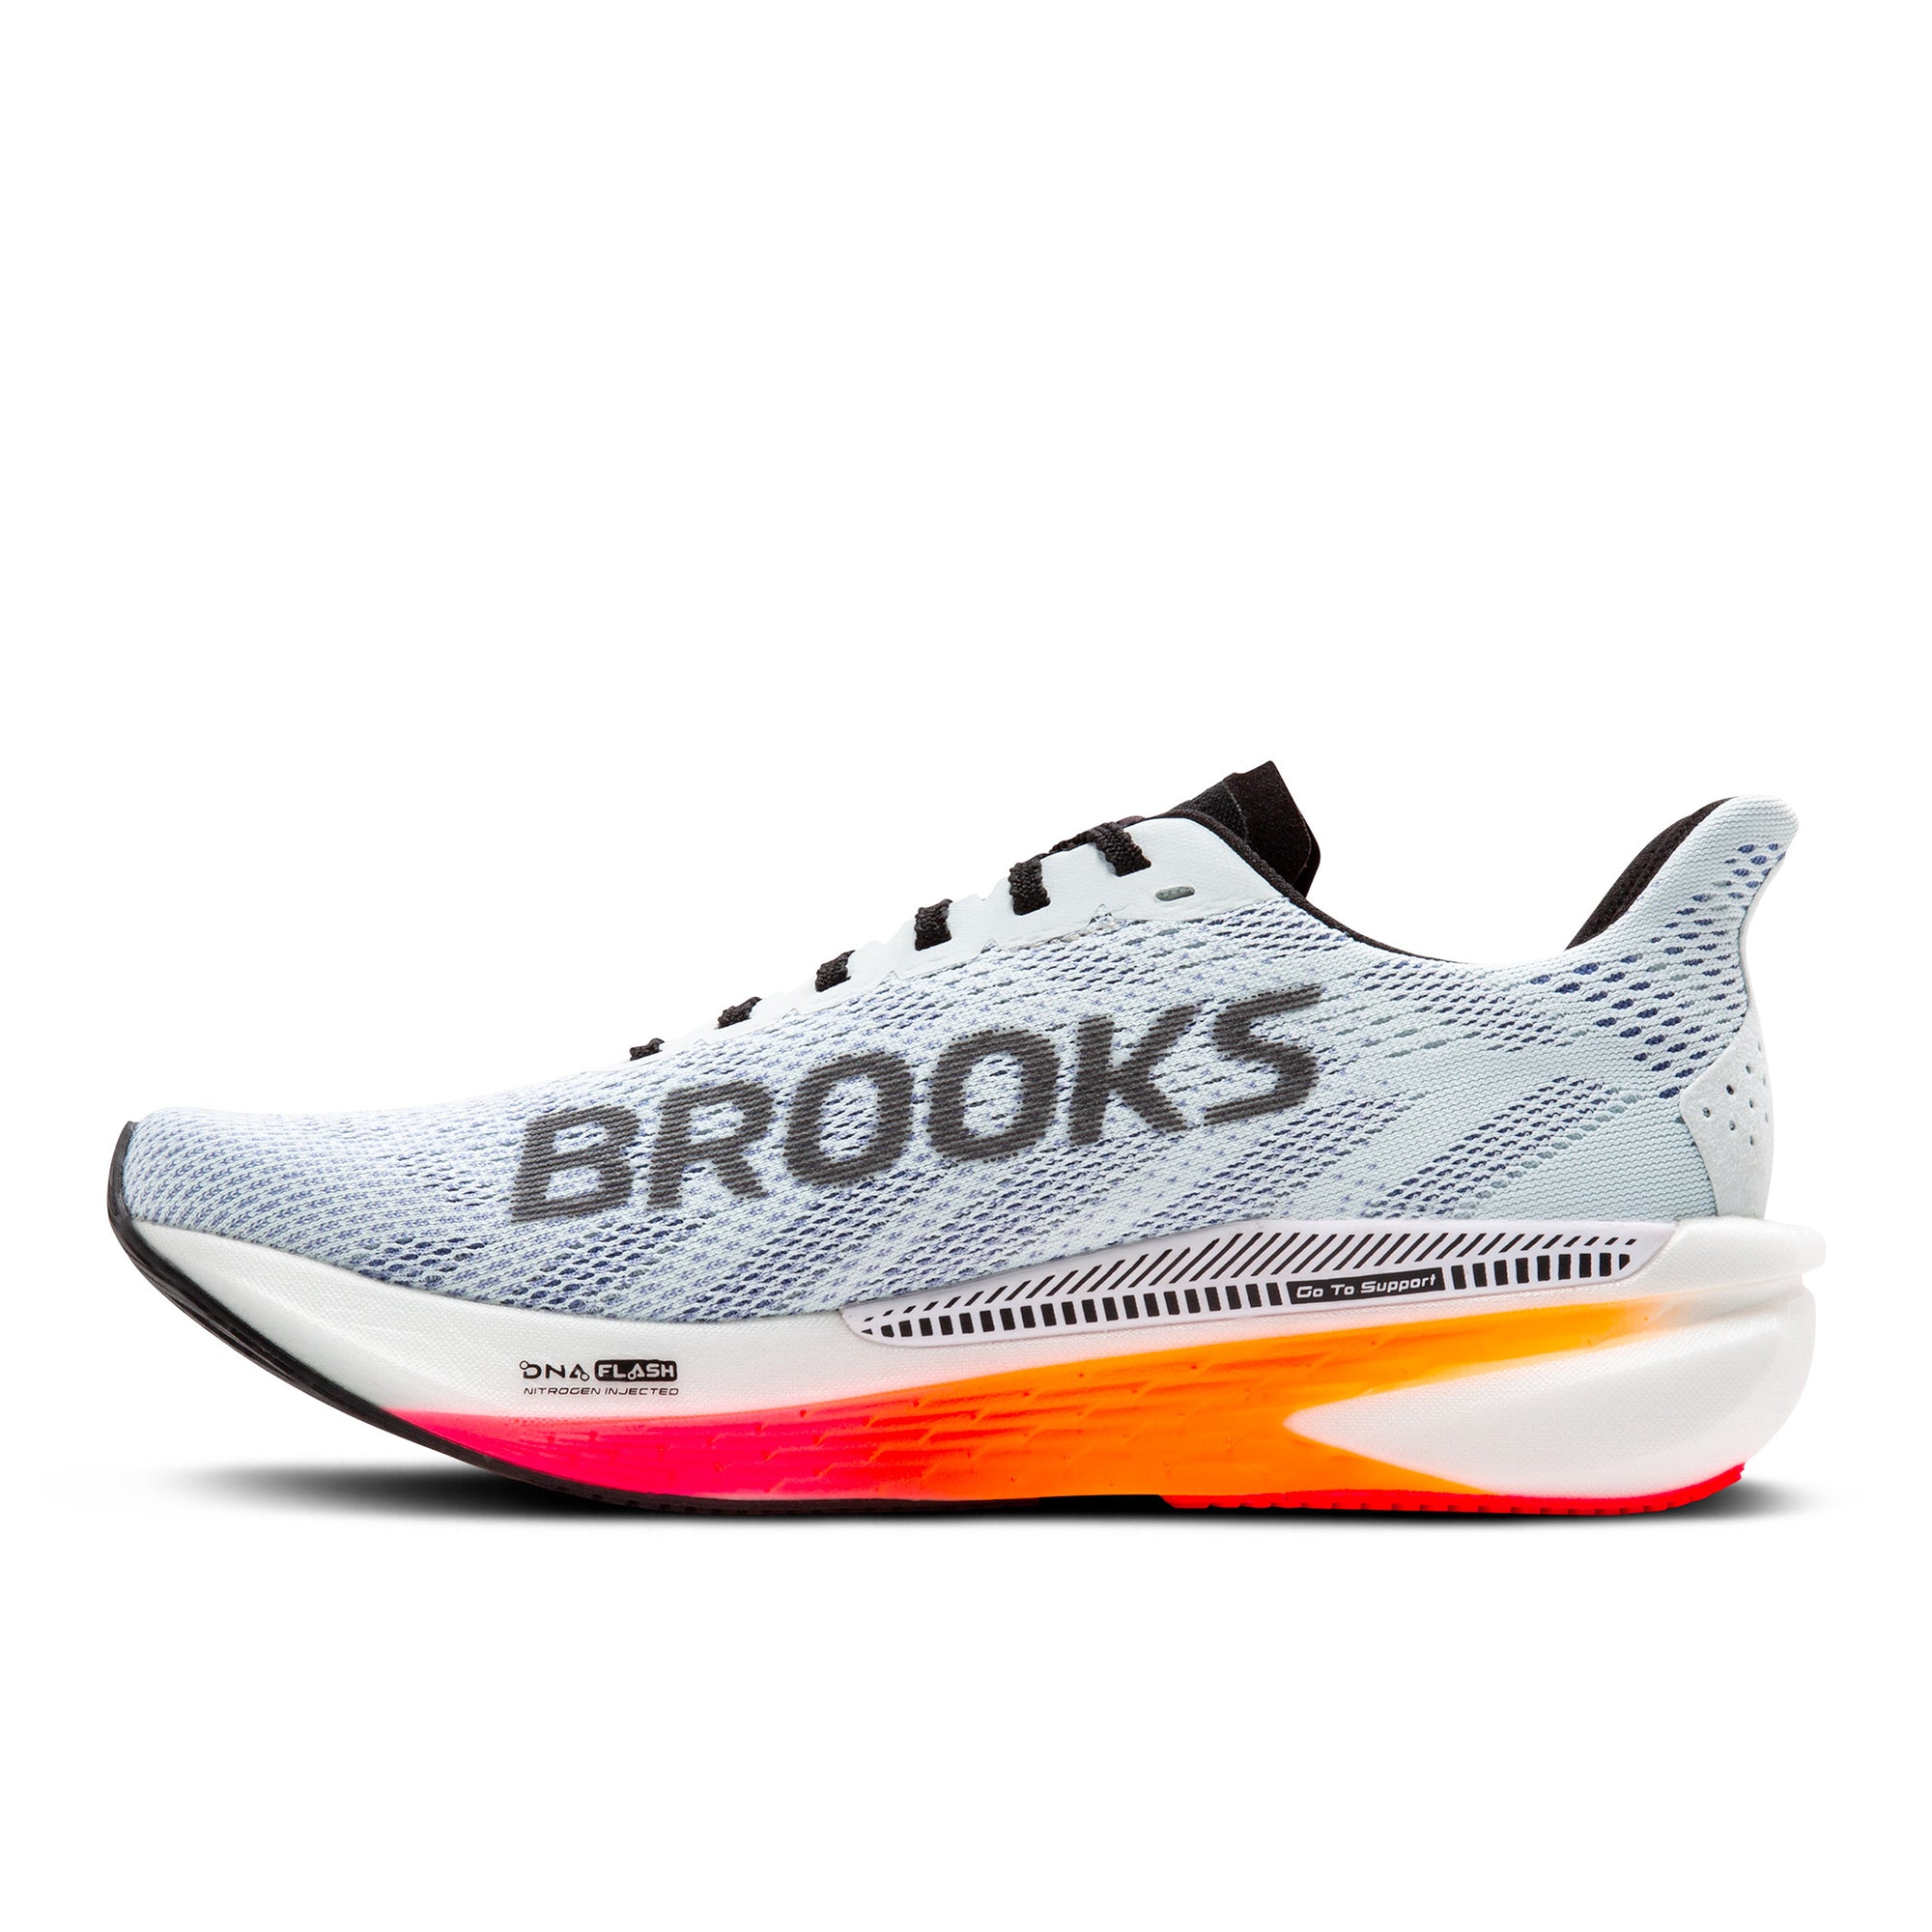 BROOKS HYPERION GTS 2 - HOMME